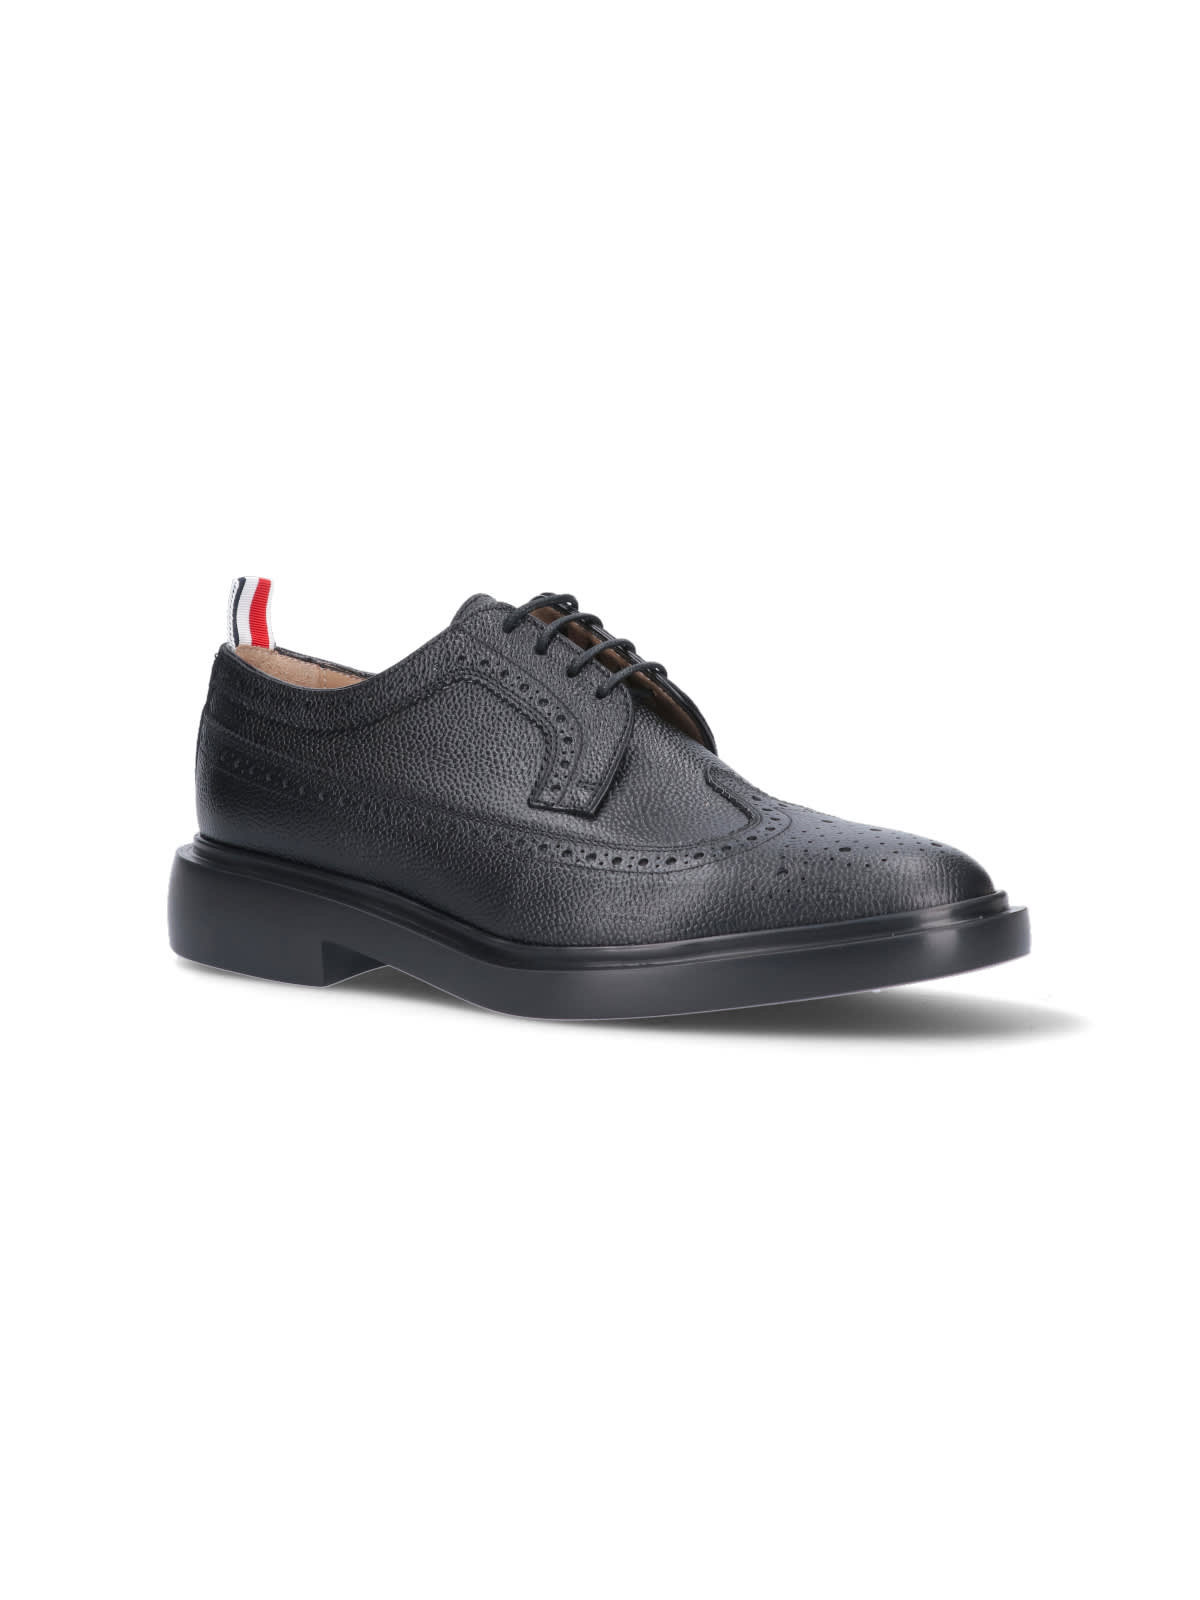 Shop Thom Browne Classic Brogue Shoes In Black